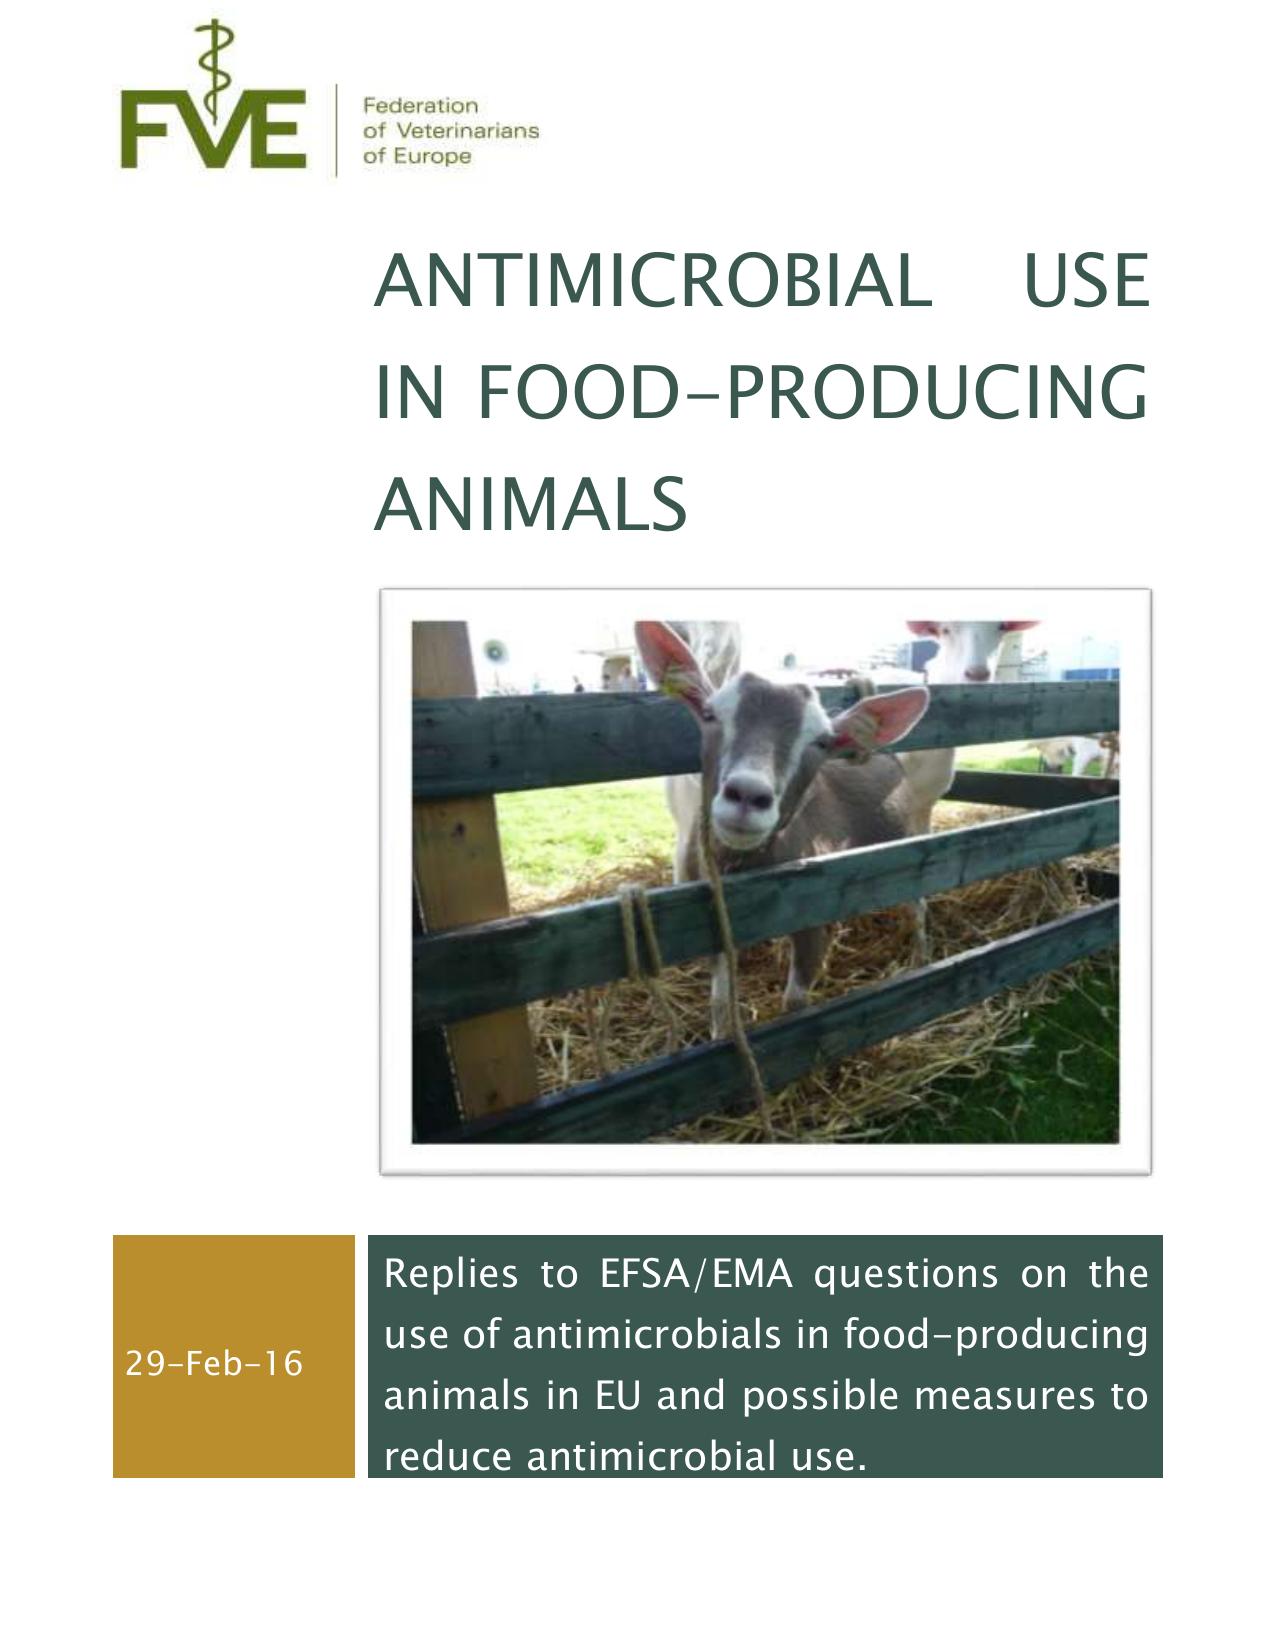 Antimicrobial use in food-producing animals